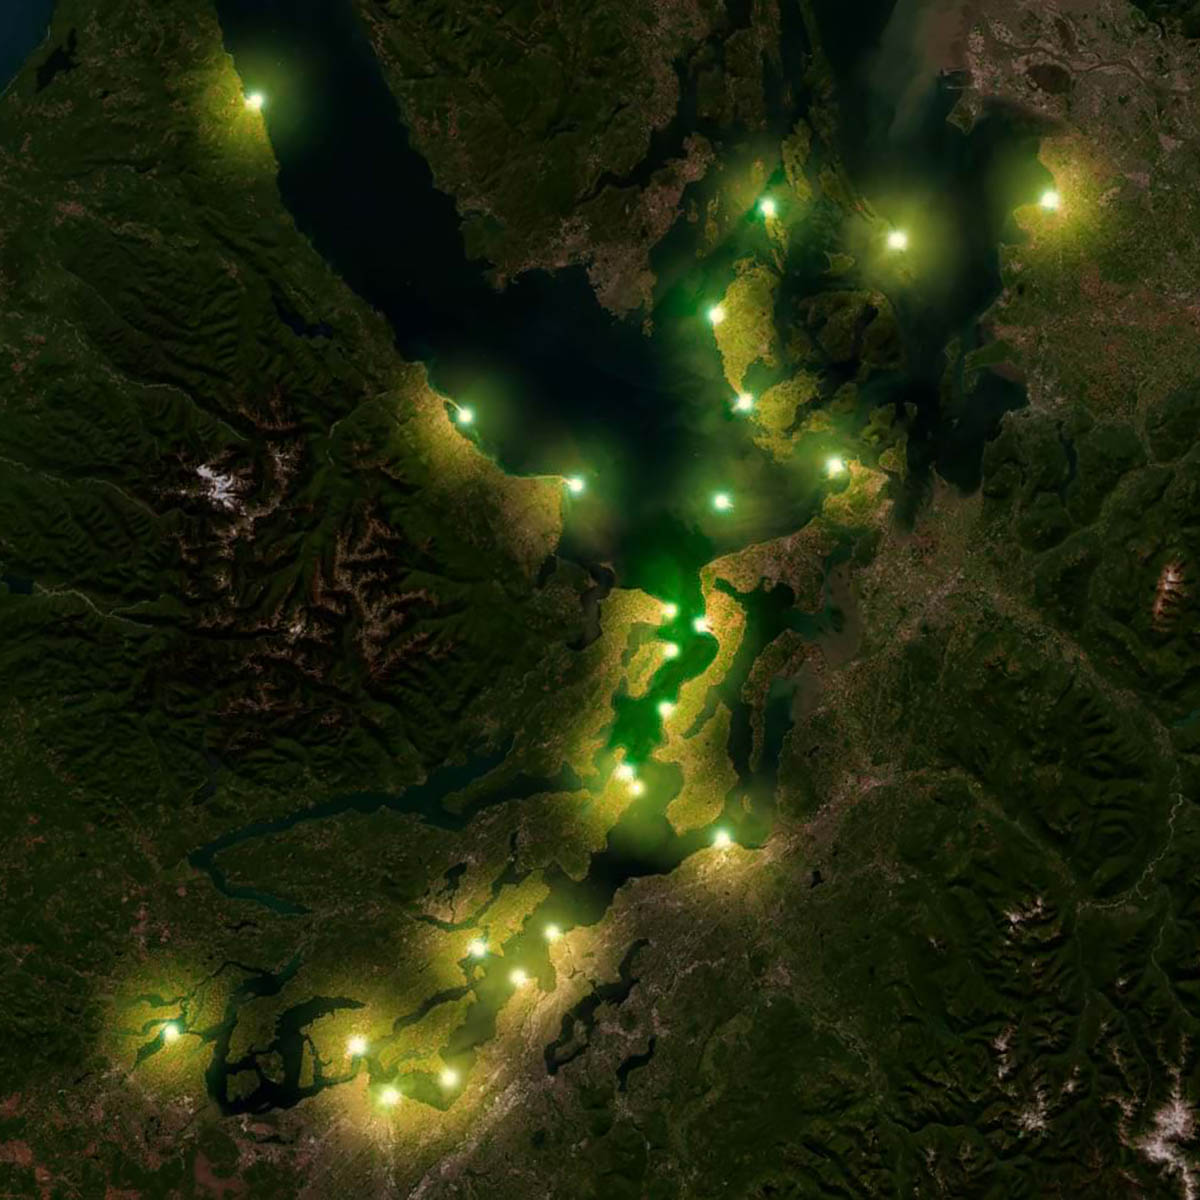 Illuminate your maps! ✨ Learn how to make point features in @ArcGISOnline look like they’re illuminating your map. esri.social/MPSH50R8TJV

#Cartography #ArcGIS